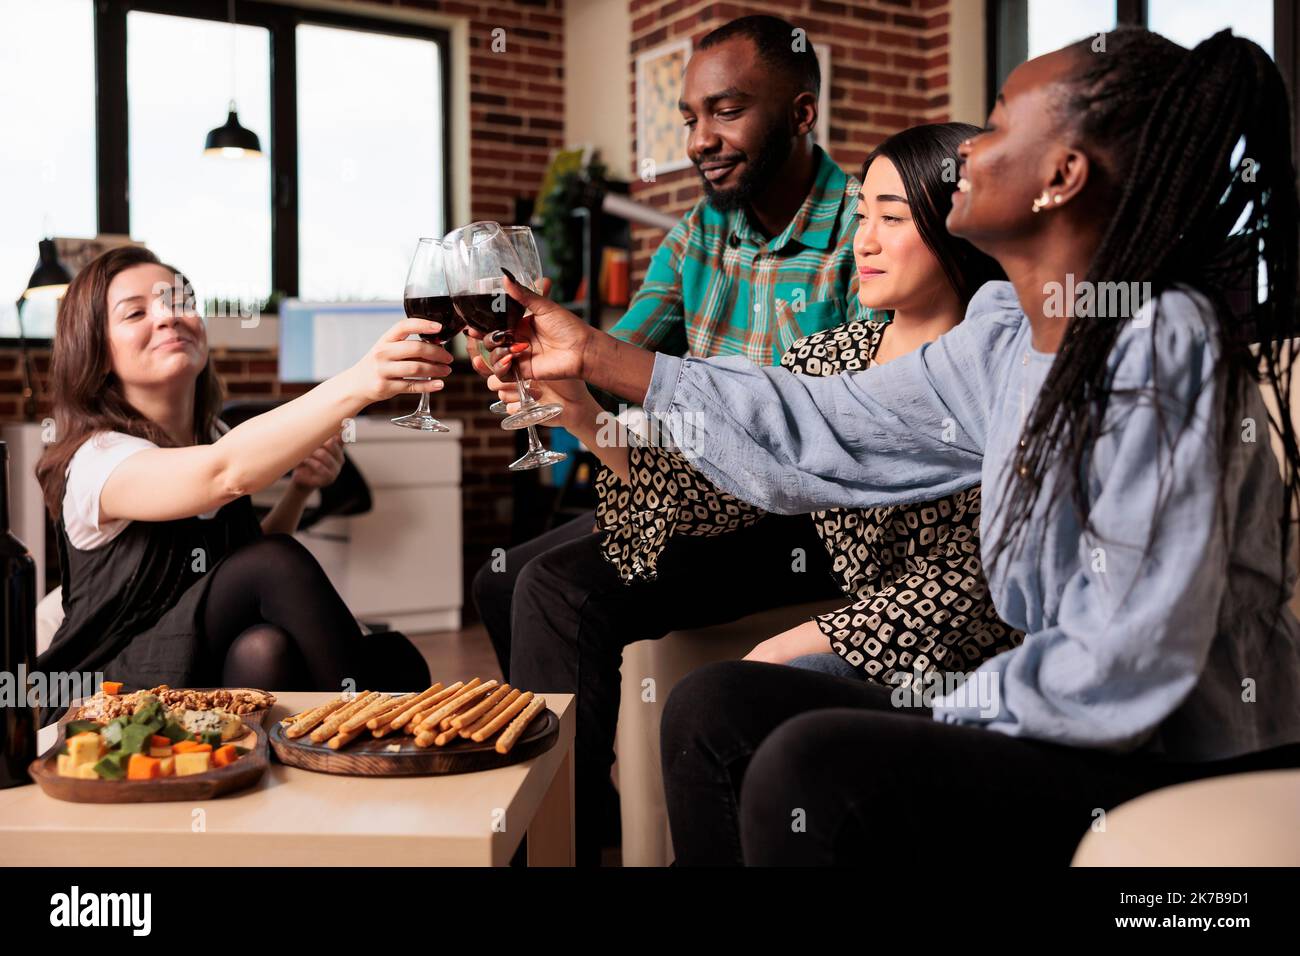 Different ethnicities friends group, toasting, drinking wine, eating snacks, having fun at young adult birthday living room apartment party. Multicultural people enjoying friendship. Stock Photo